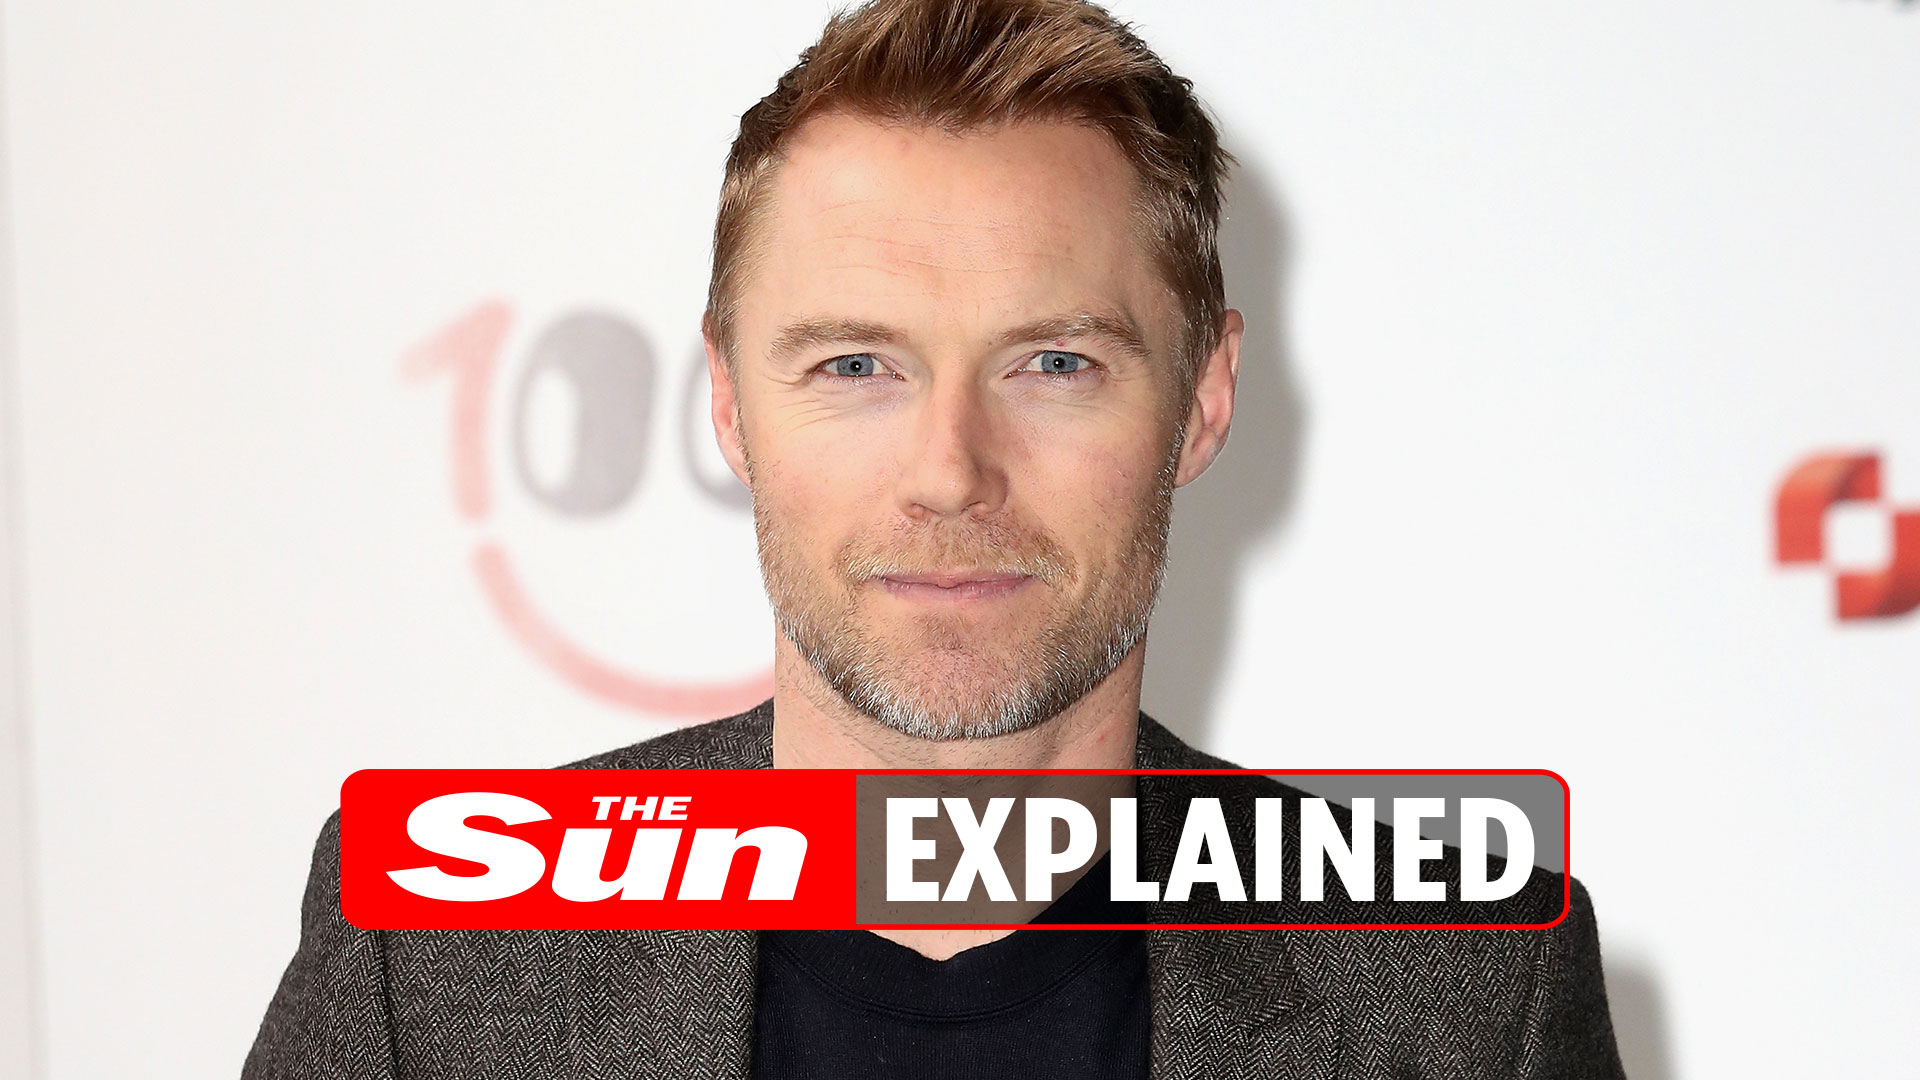 What is Ronan Keating’s net worth and how old is he? – The Sun